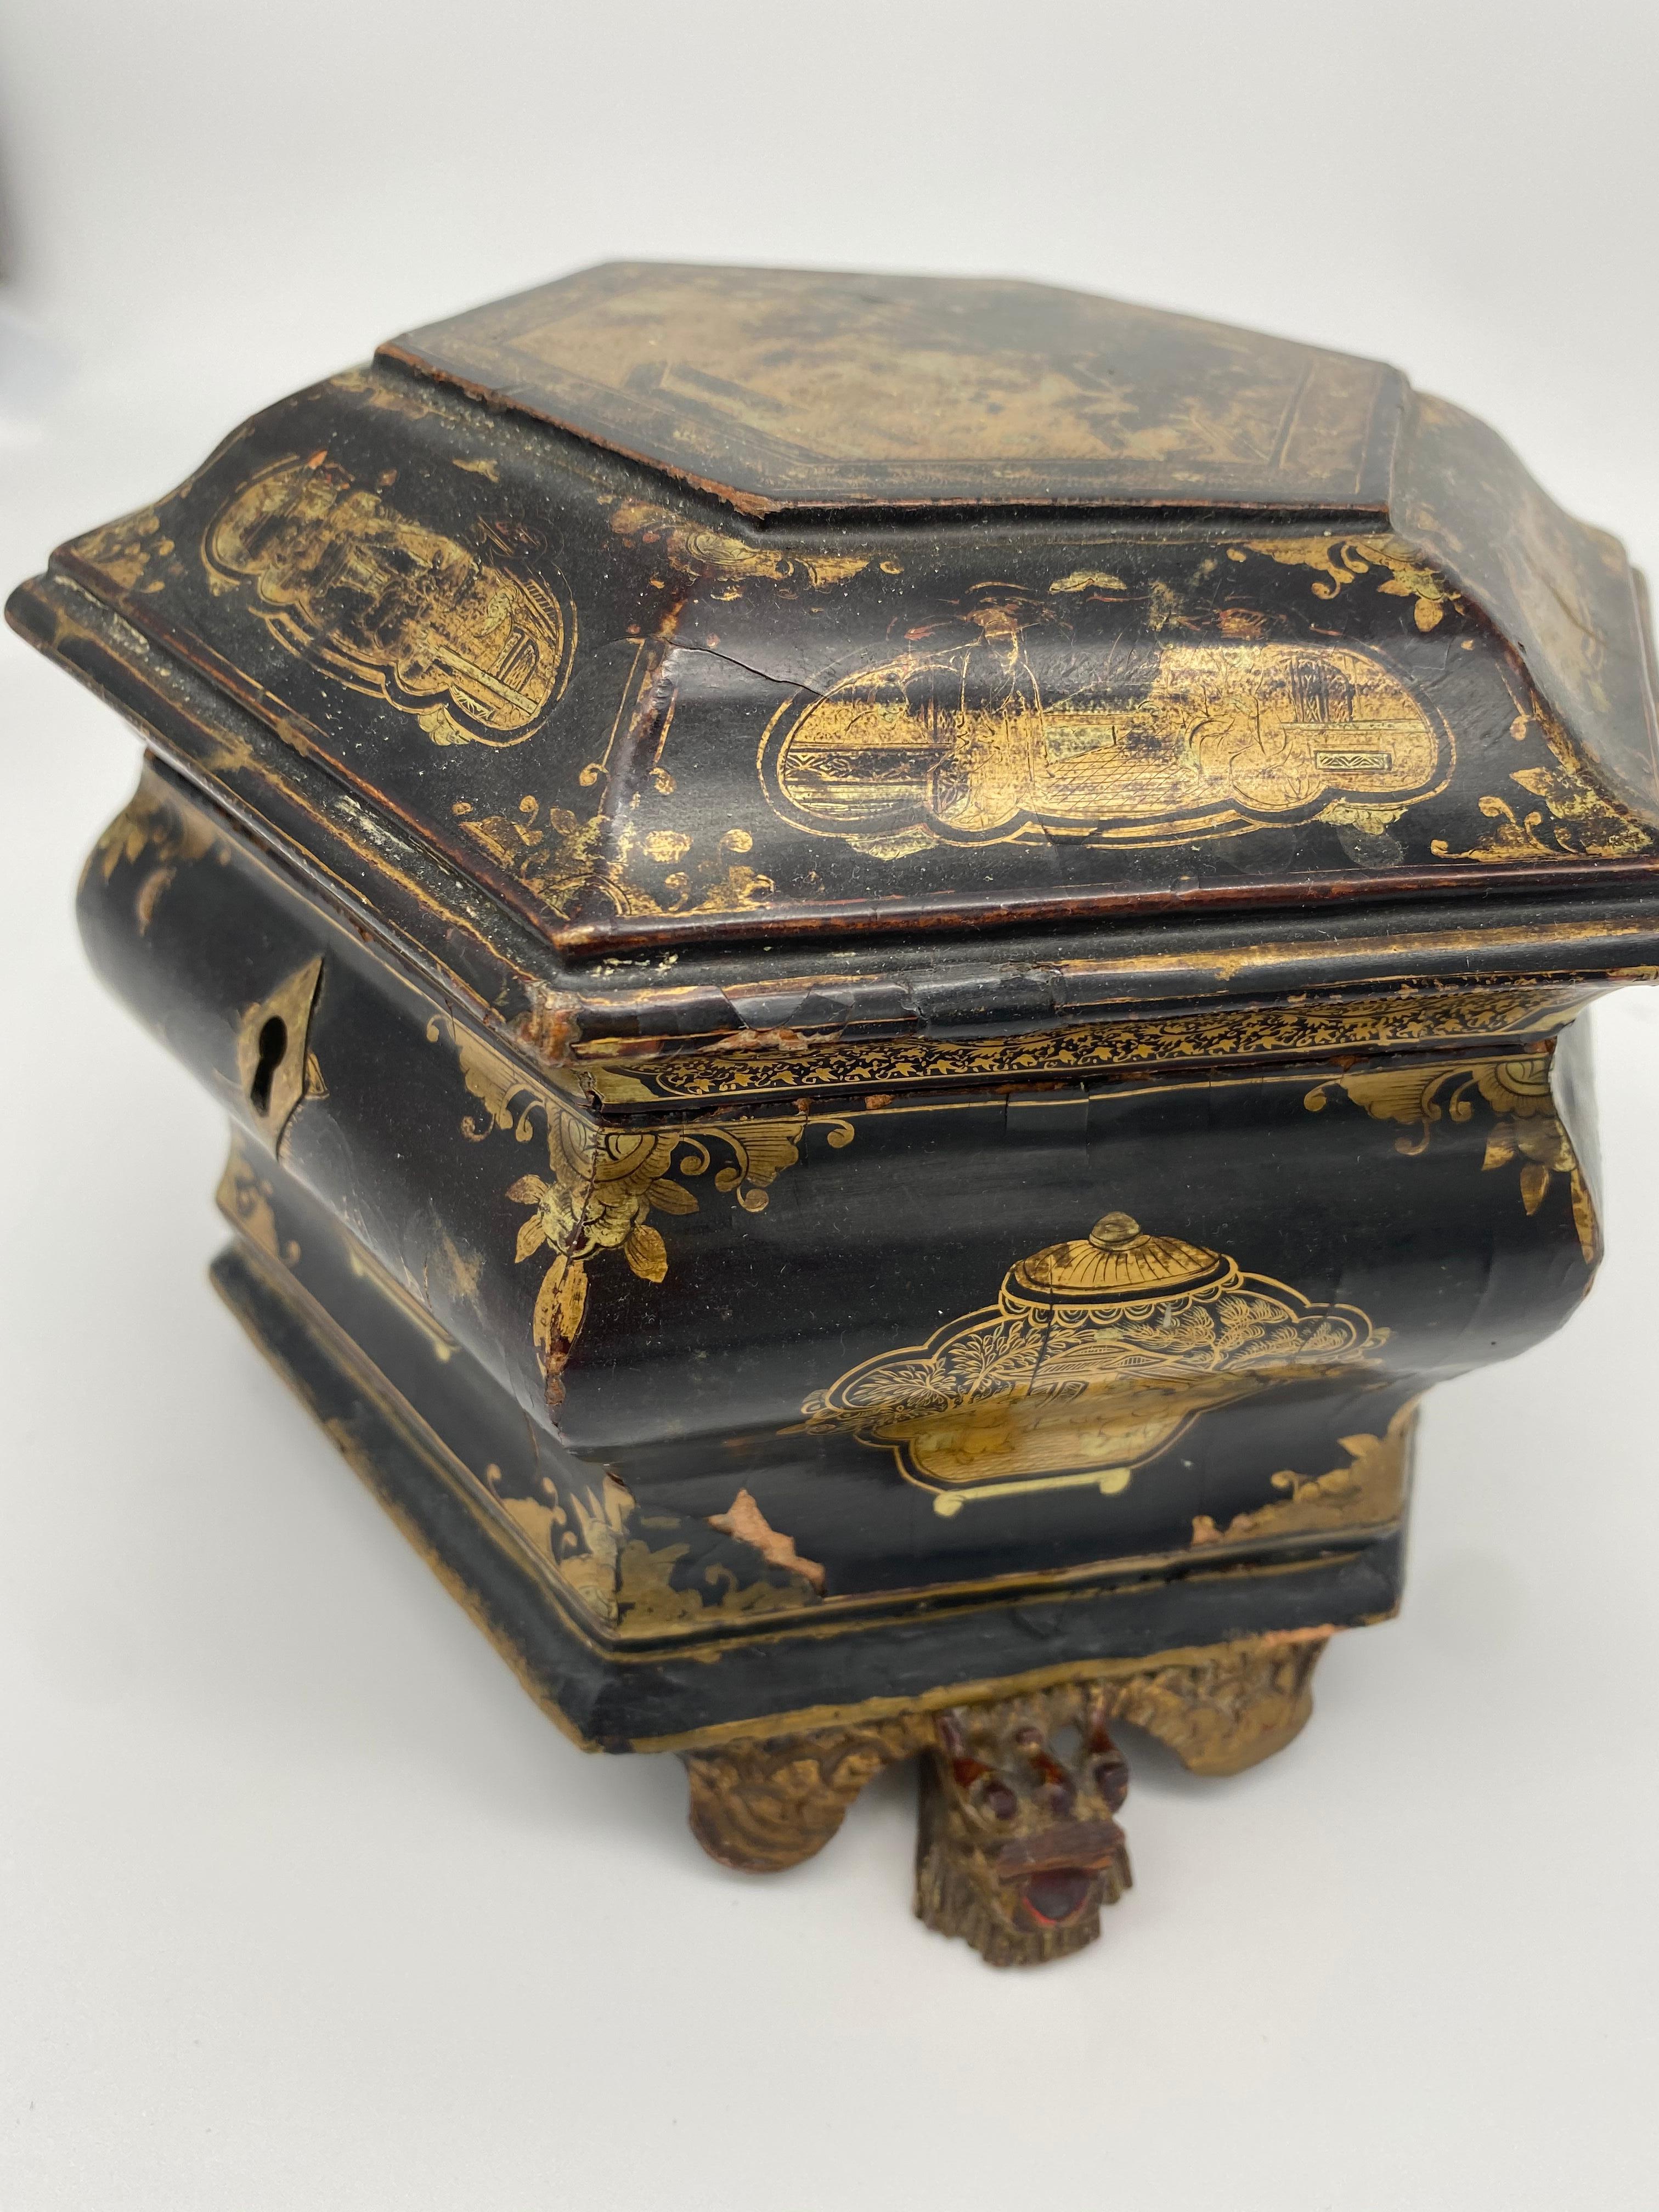 19th century Qing Dynasty Chinese export gilt decorated black lacquer tea caddy. Hexagonal shape with floral chased pewter covered caddies detailed in gold and black. there are 3 dragon feets !